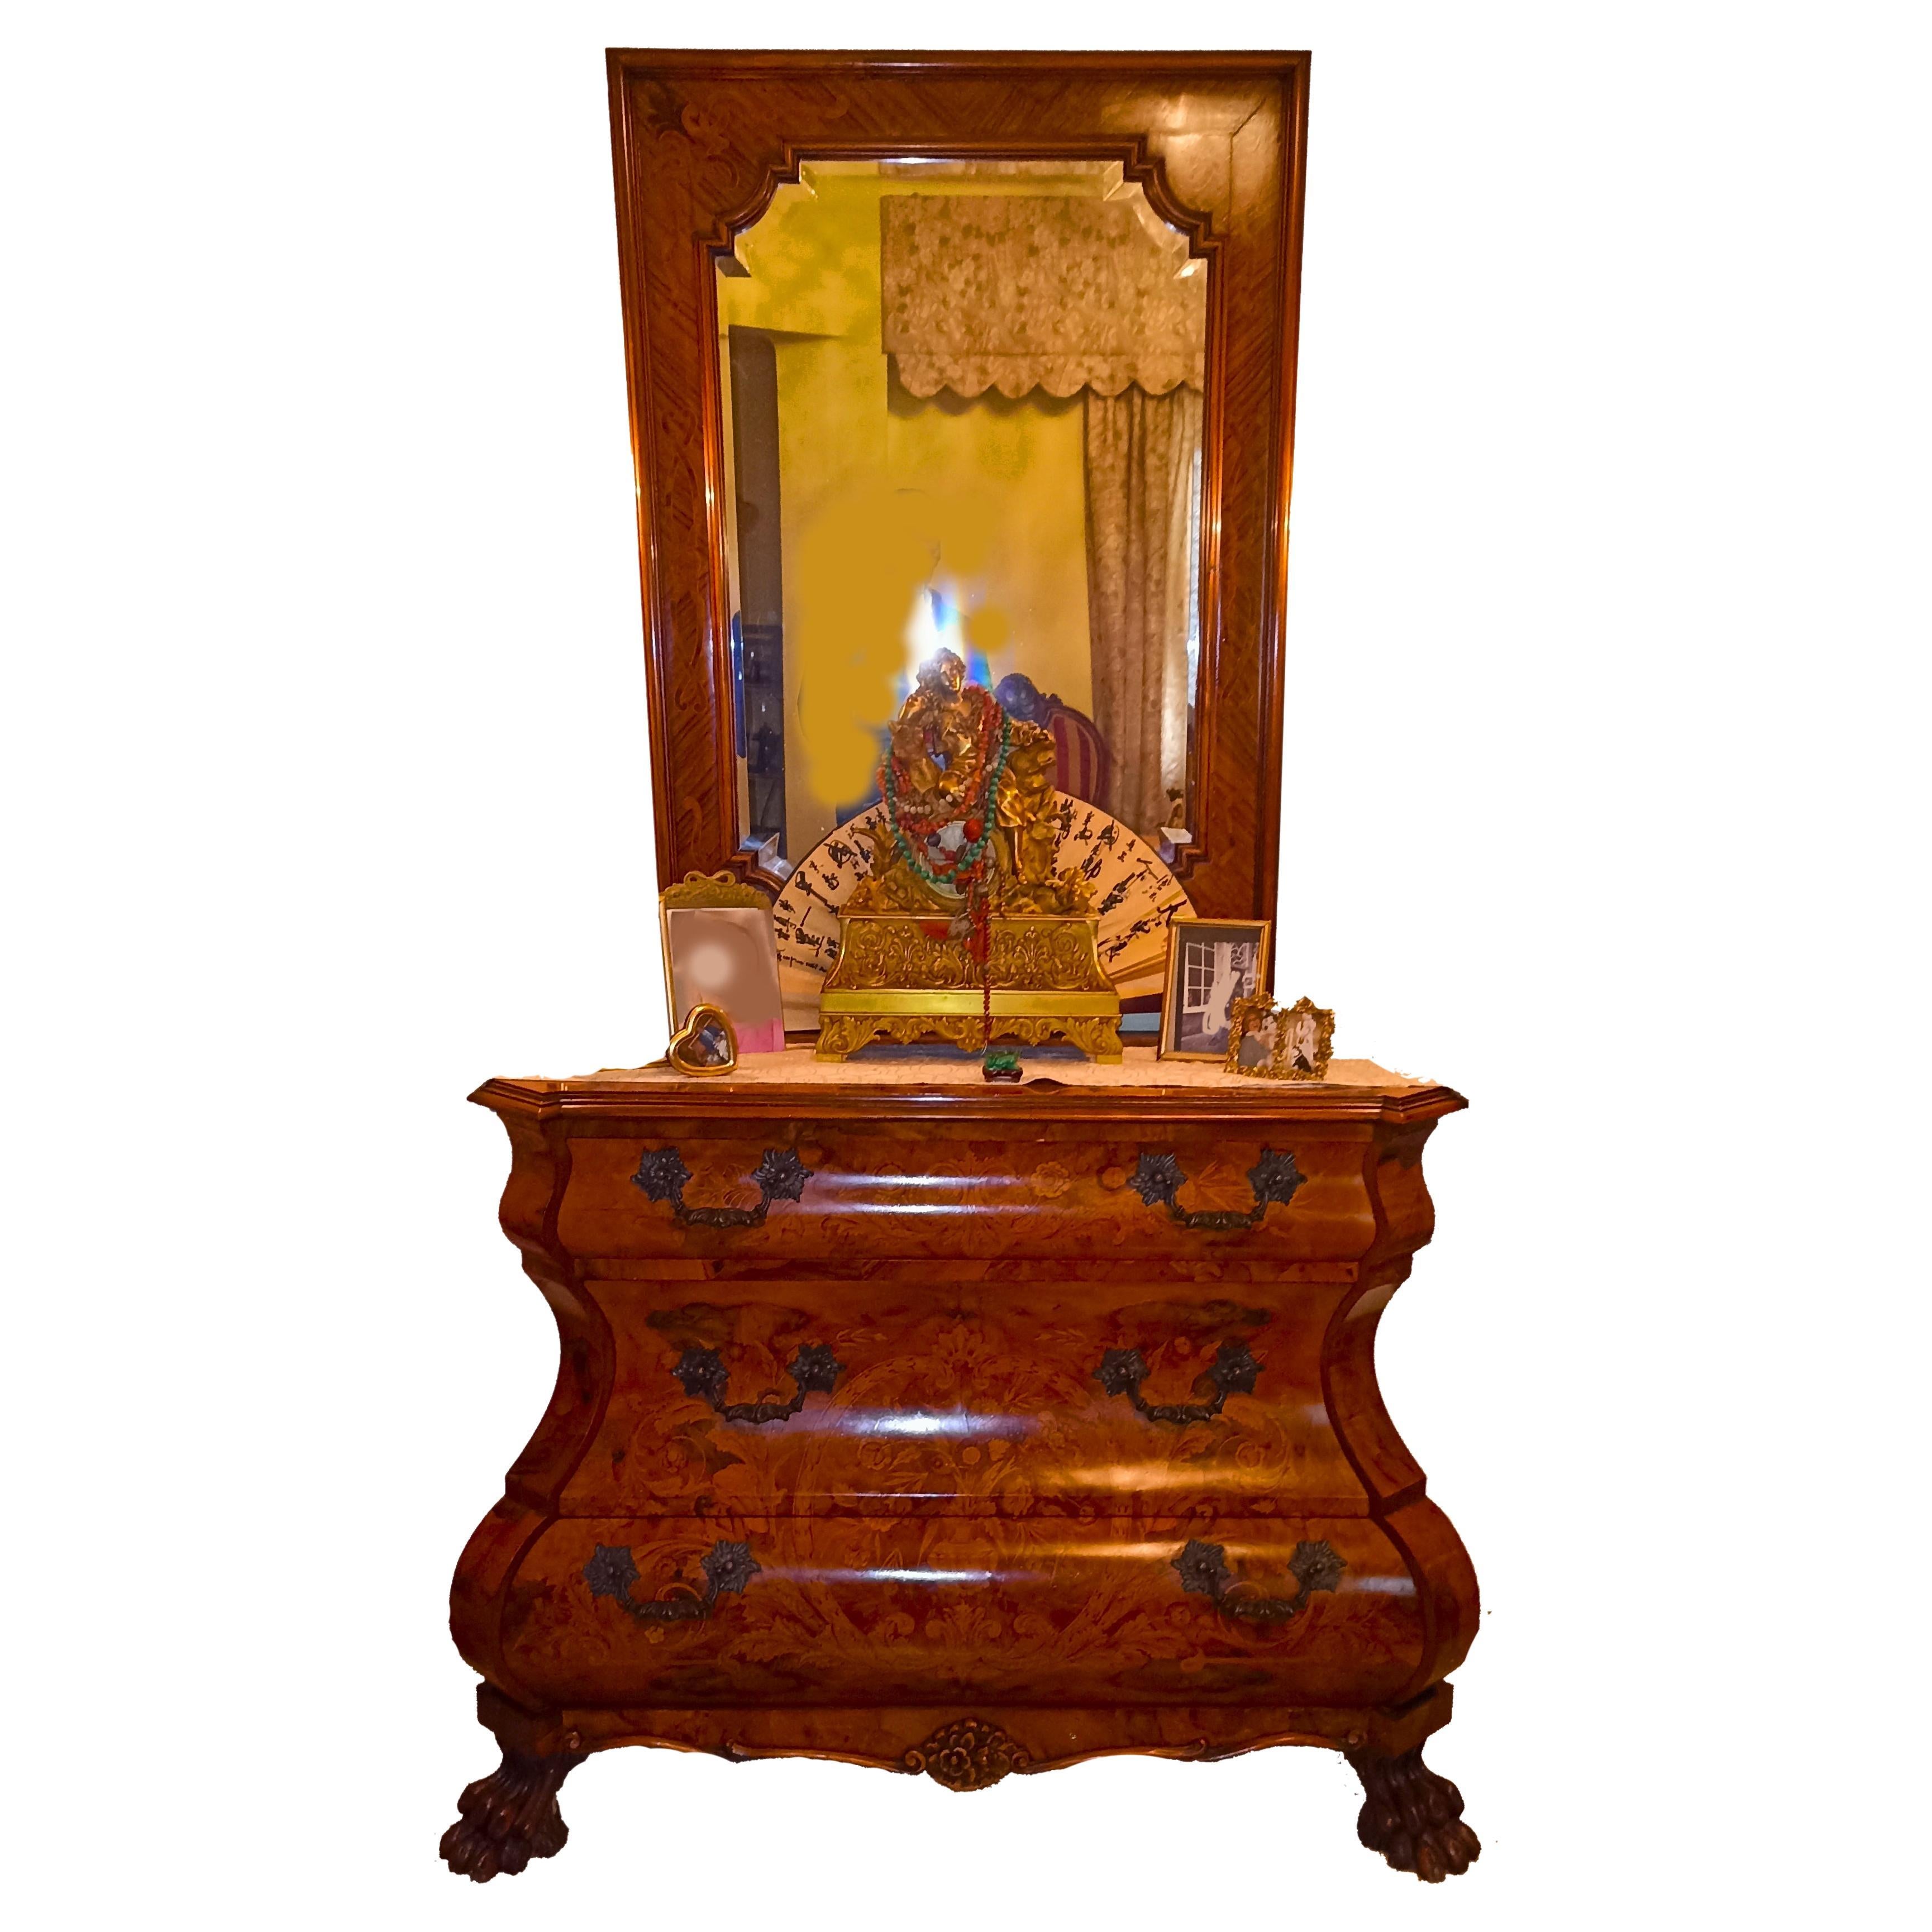 Elegant Late 19th Century Dutch Walnut Marquetry Inlaid Commode and Mirror Set